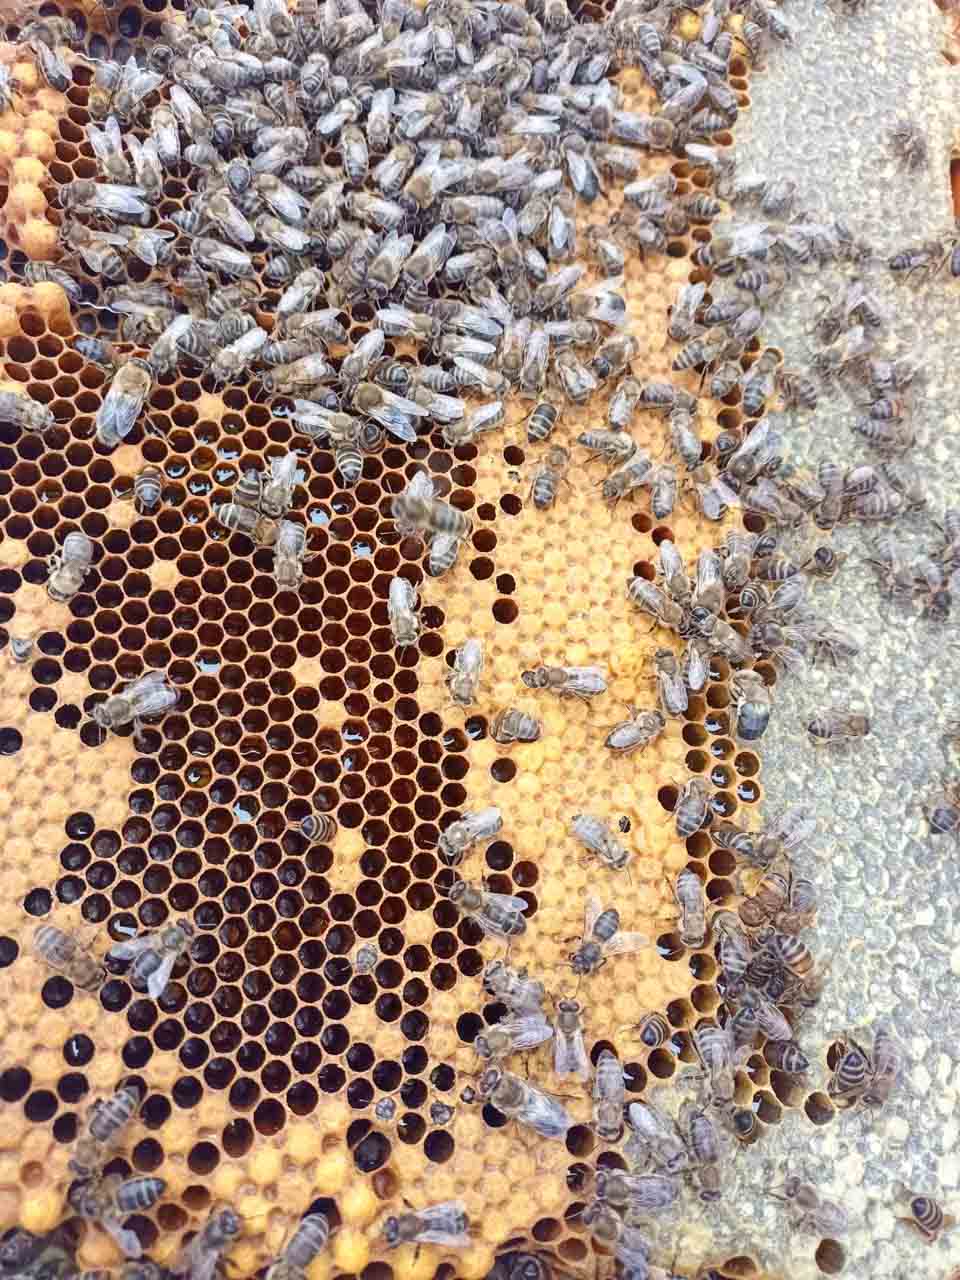 A close-up shot of a hive frame with capped honey cells